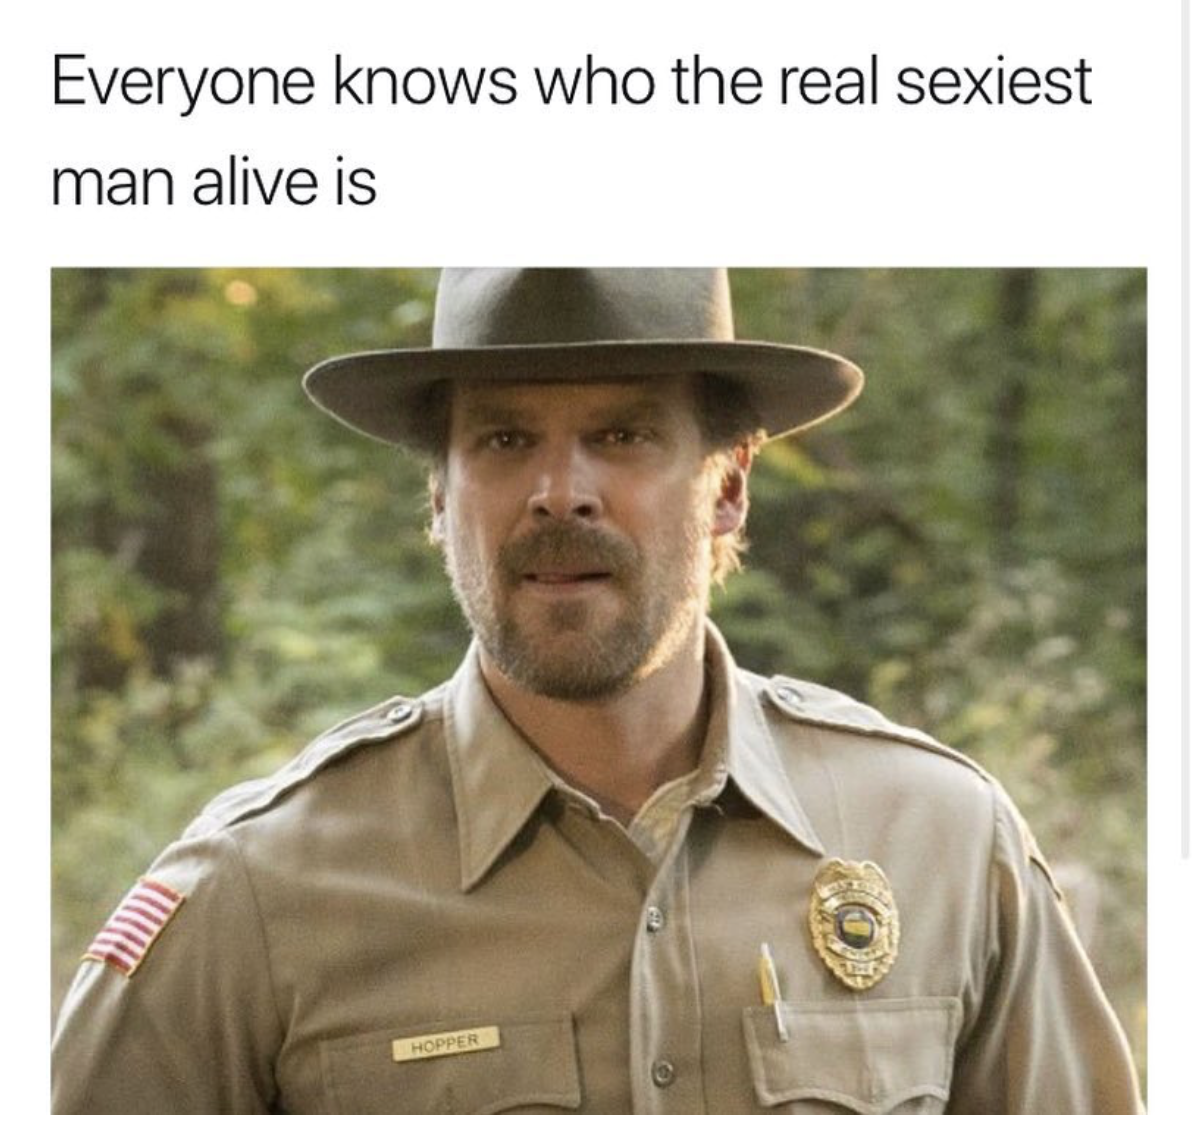 hopper stranger things - Everyone knows who the real sexiest man alive is